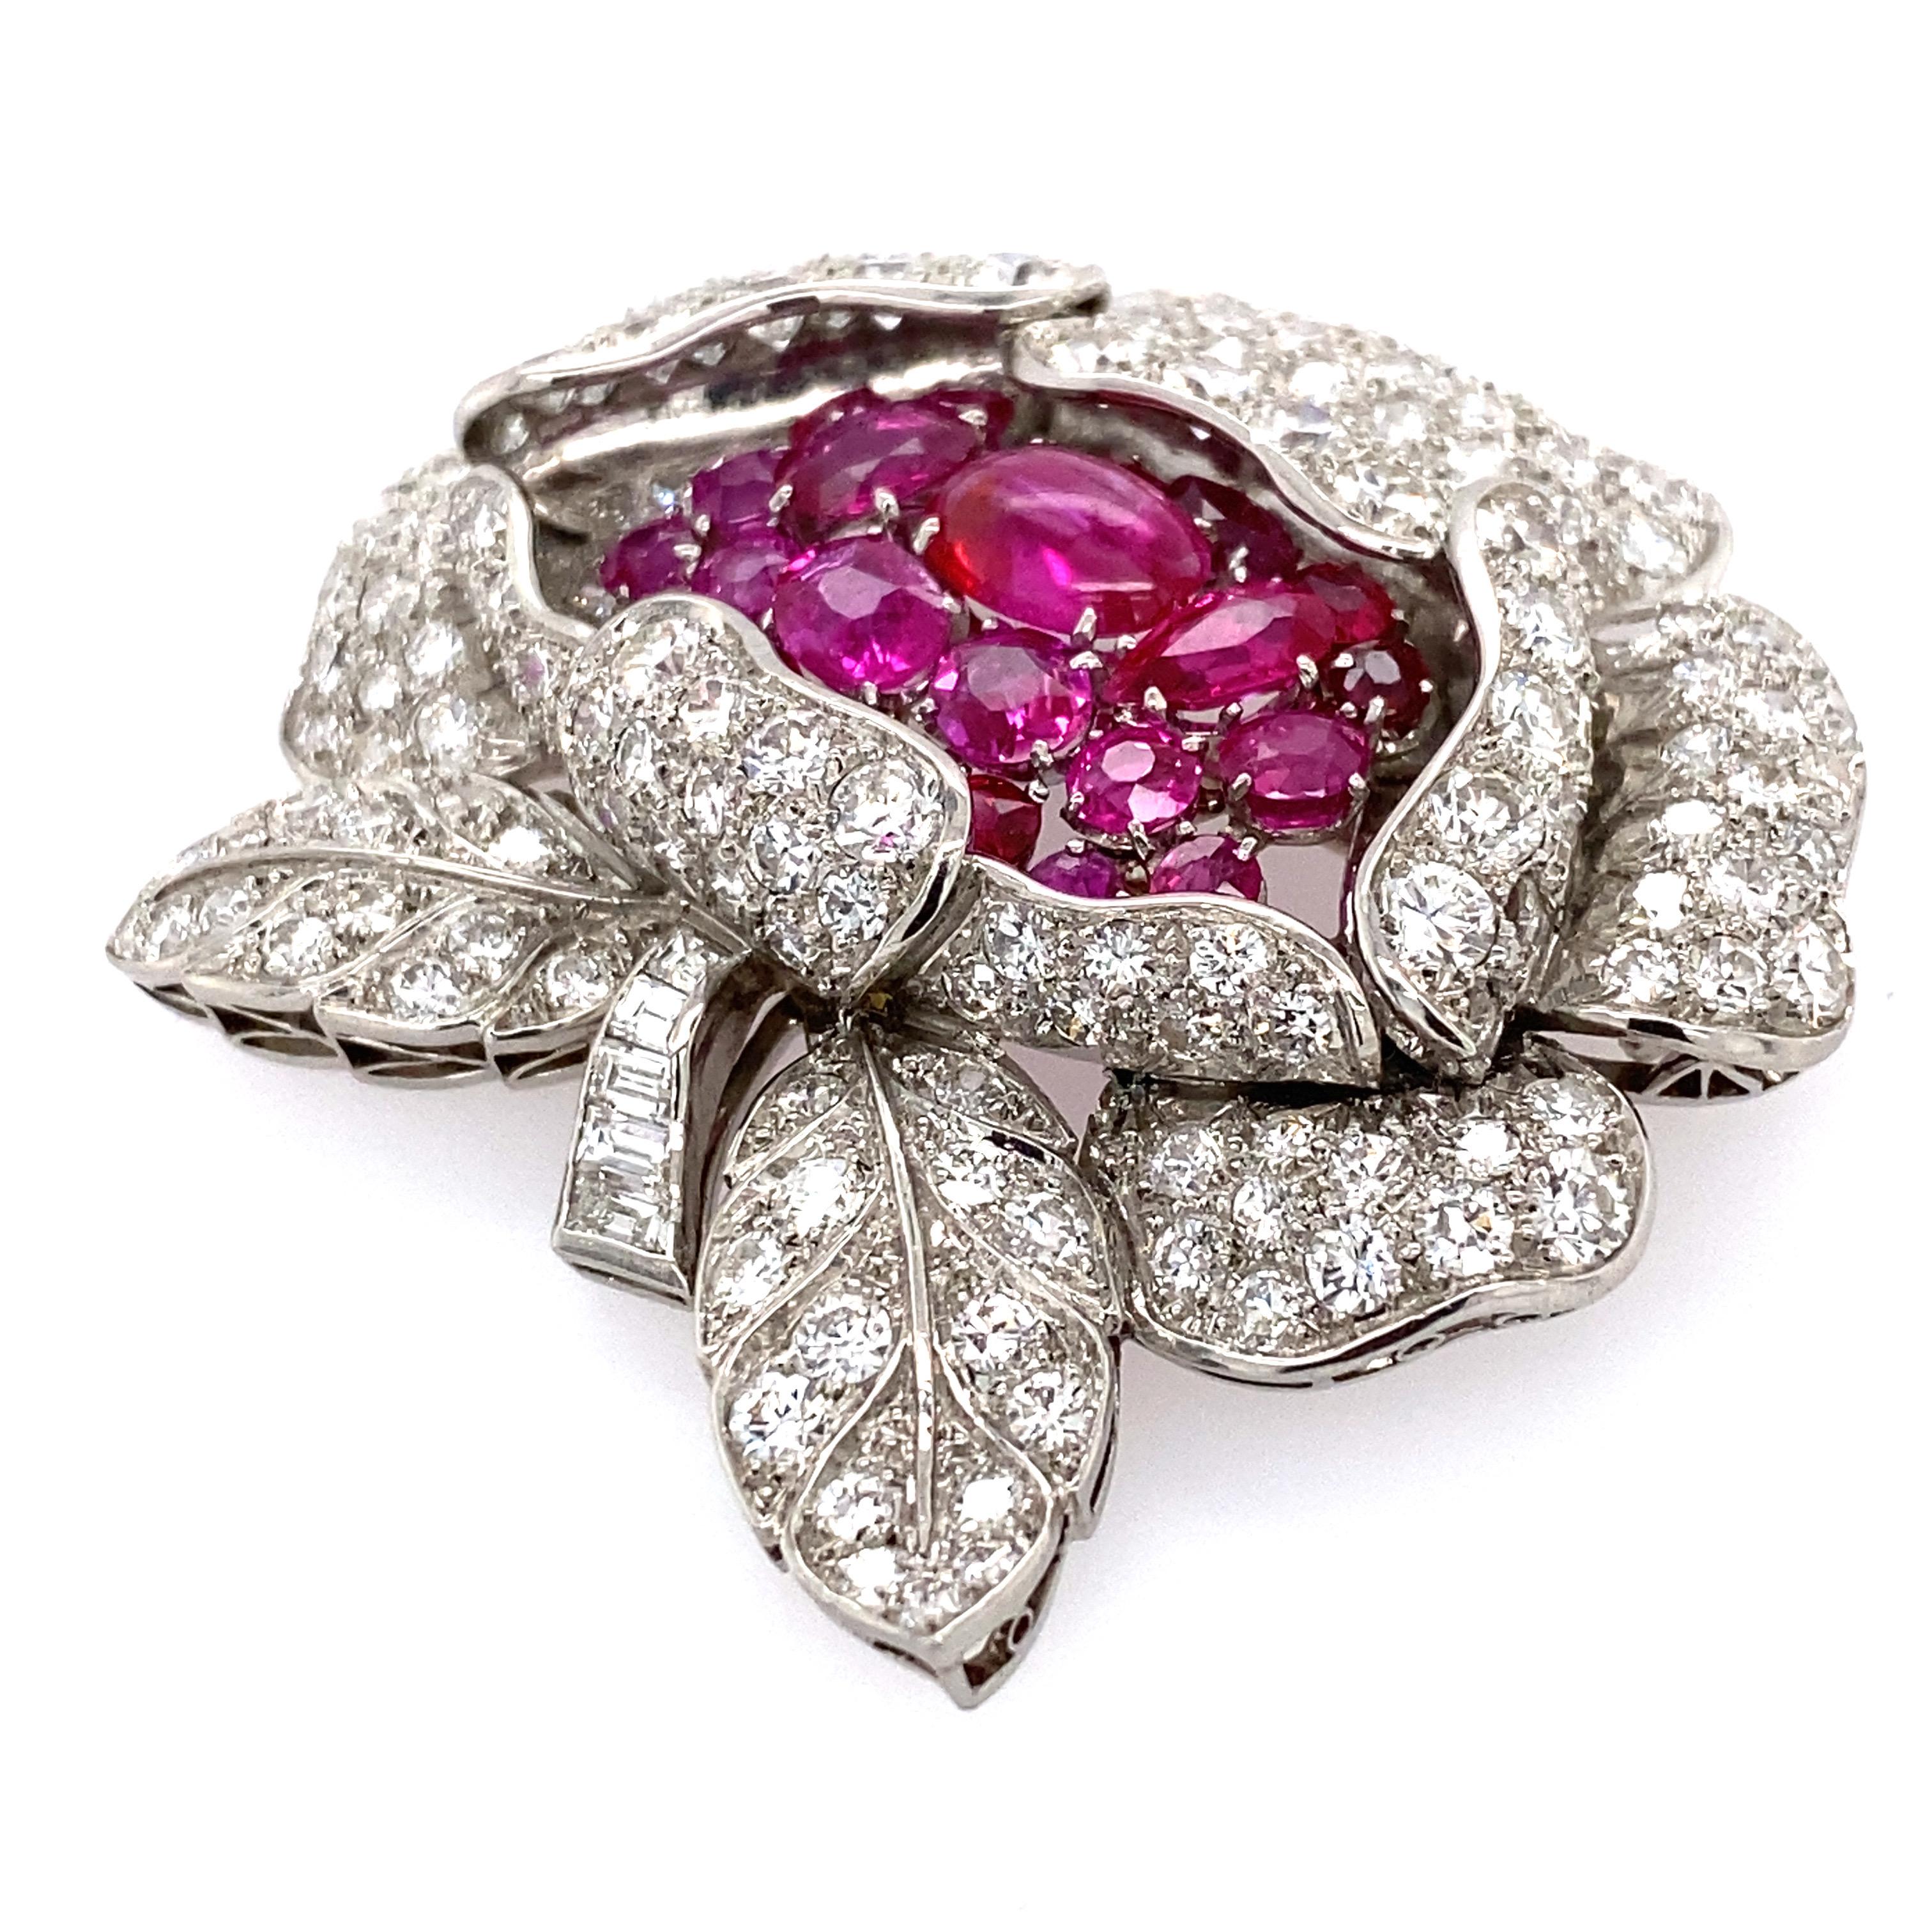 Fabulous French Art Deco Platinum Burmese Ruby Diamond Brooch In Excellent Condition For Sale In New York, NY